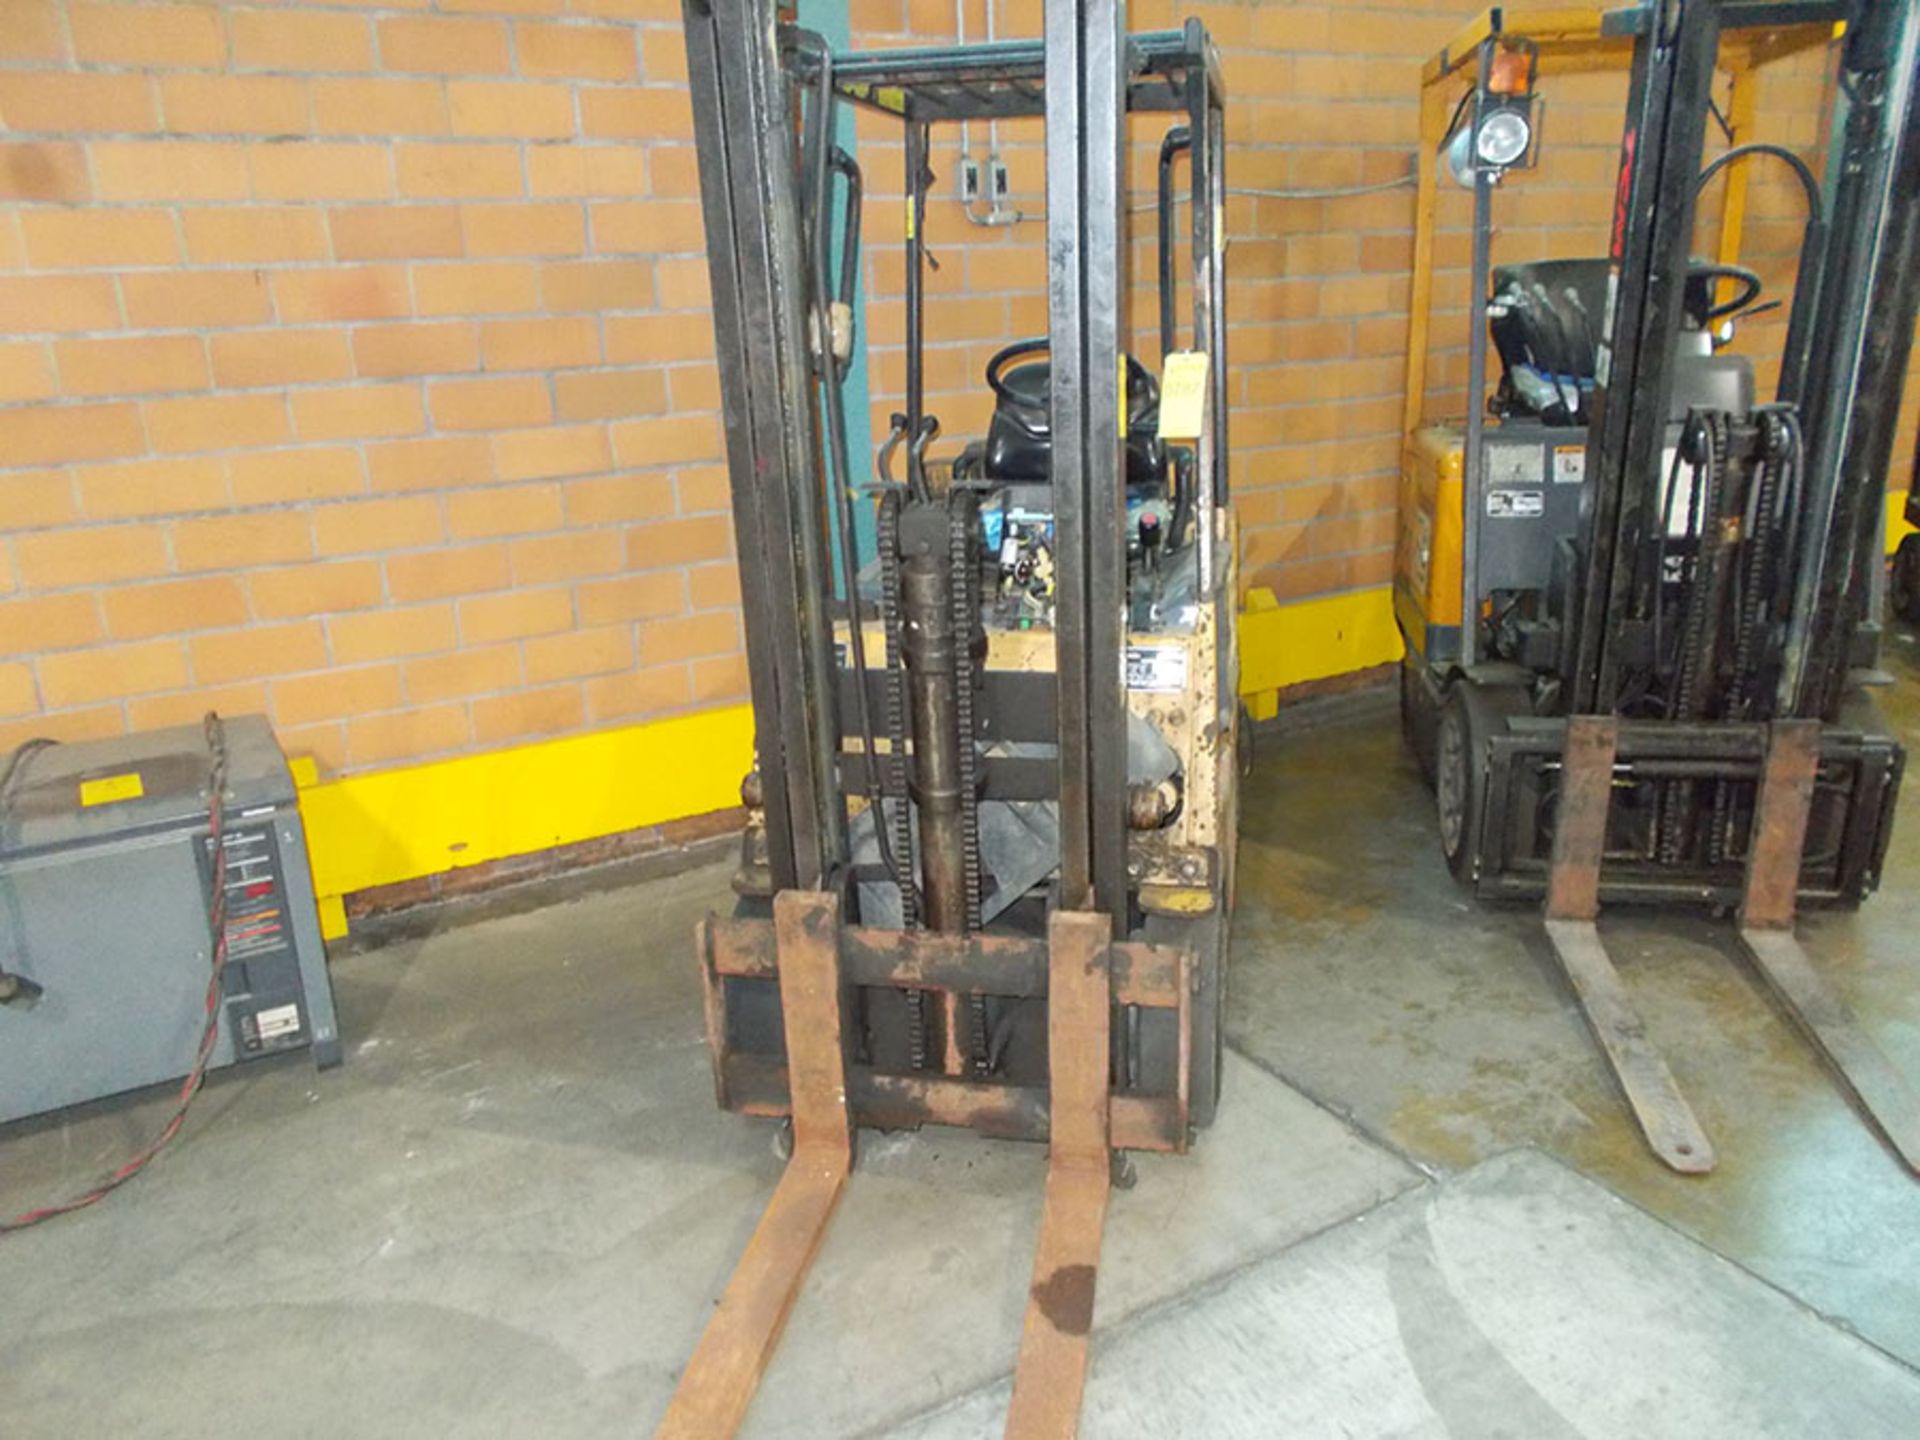 CATERPILLAR 3,500 LB. CAPACITY FORKLIFT; MODEL GC18, S/N 3EM-00188, 2-STAGE MAST, LP GAS (OUT OF